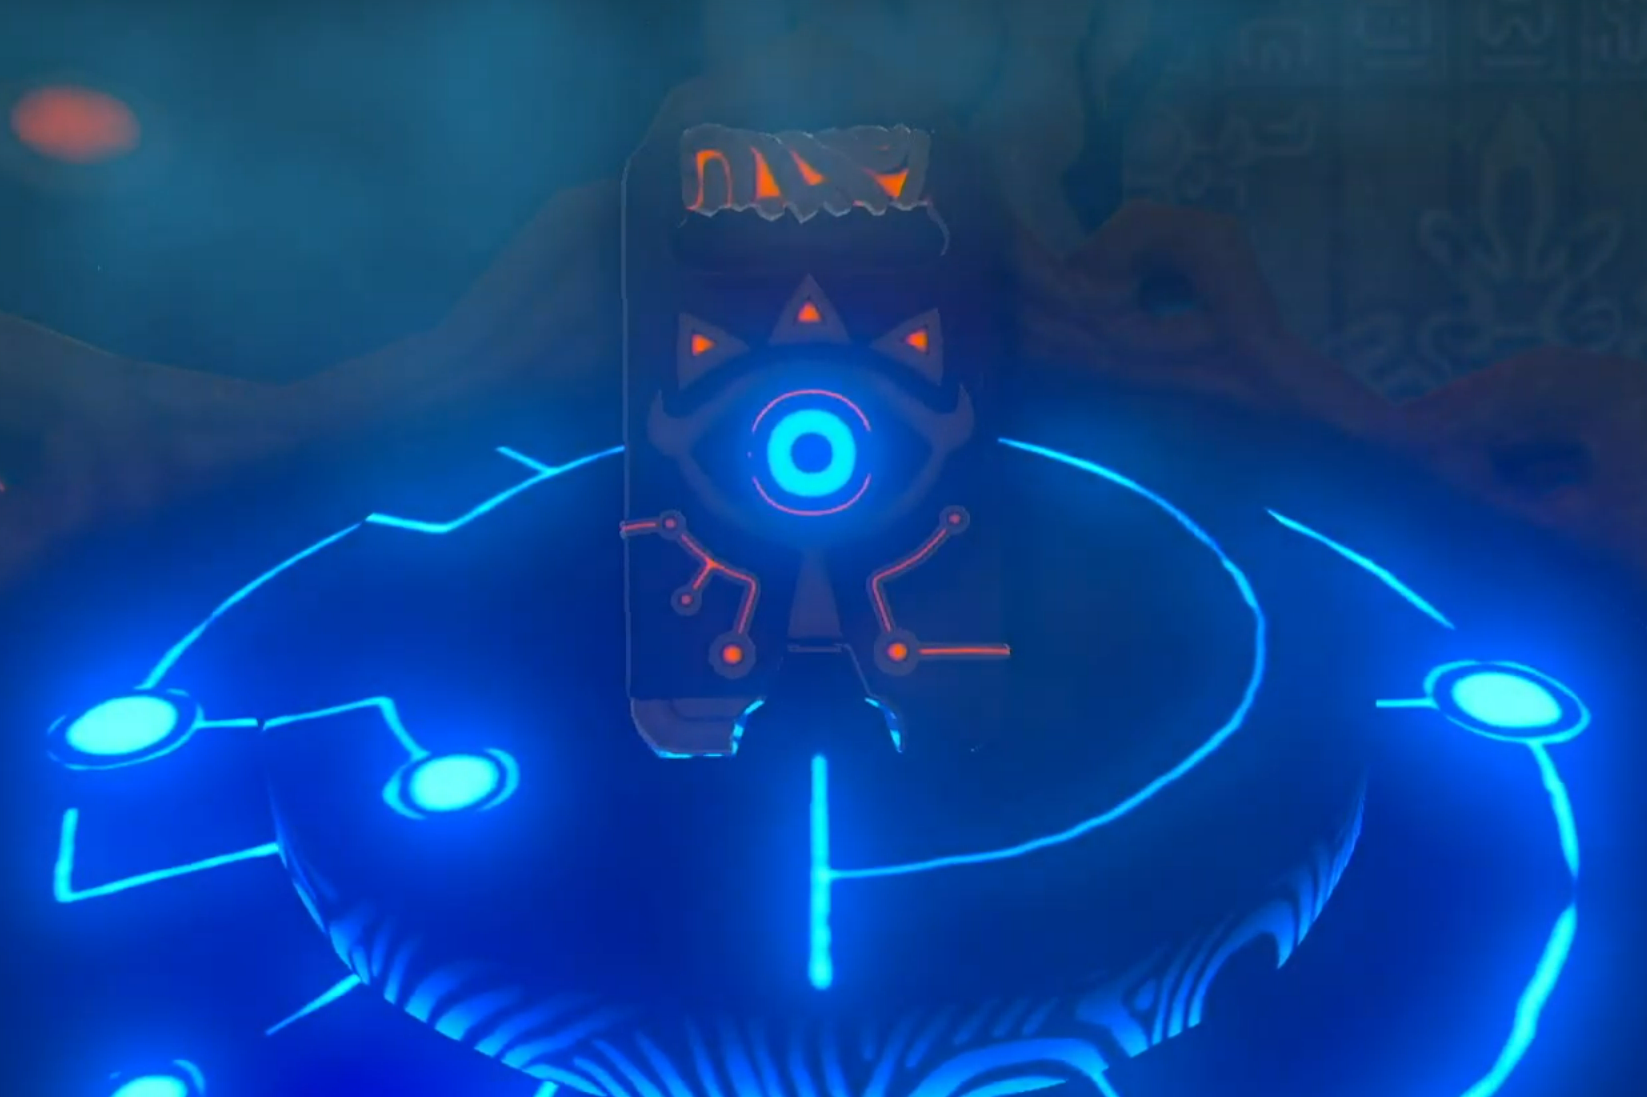 Sheikah slate from Breath of the Wild